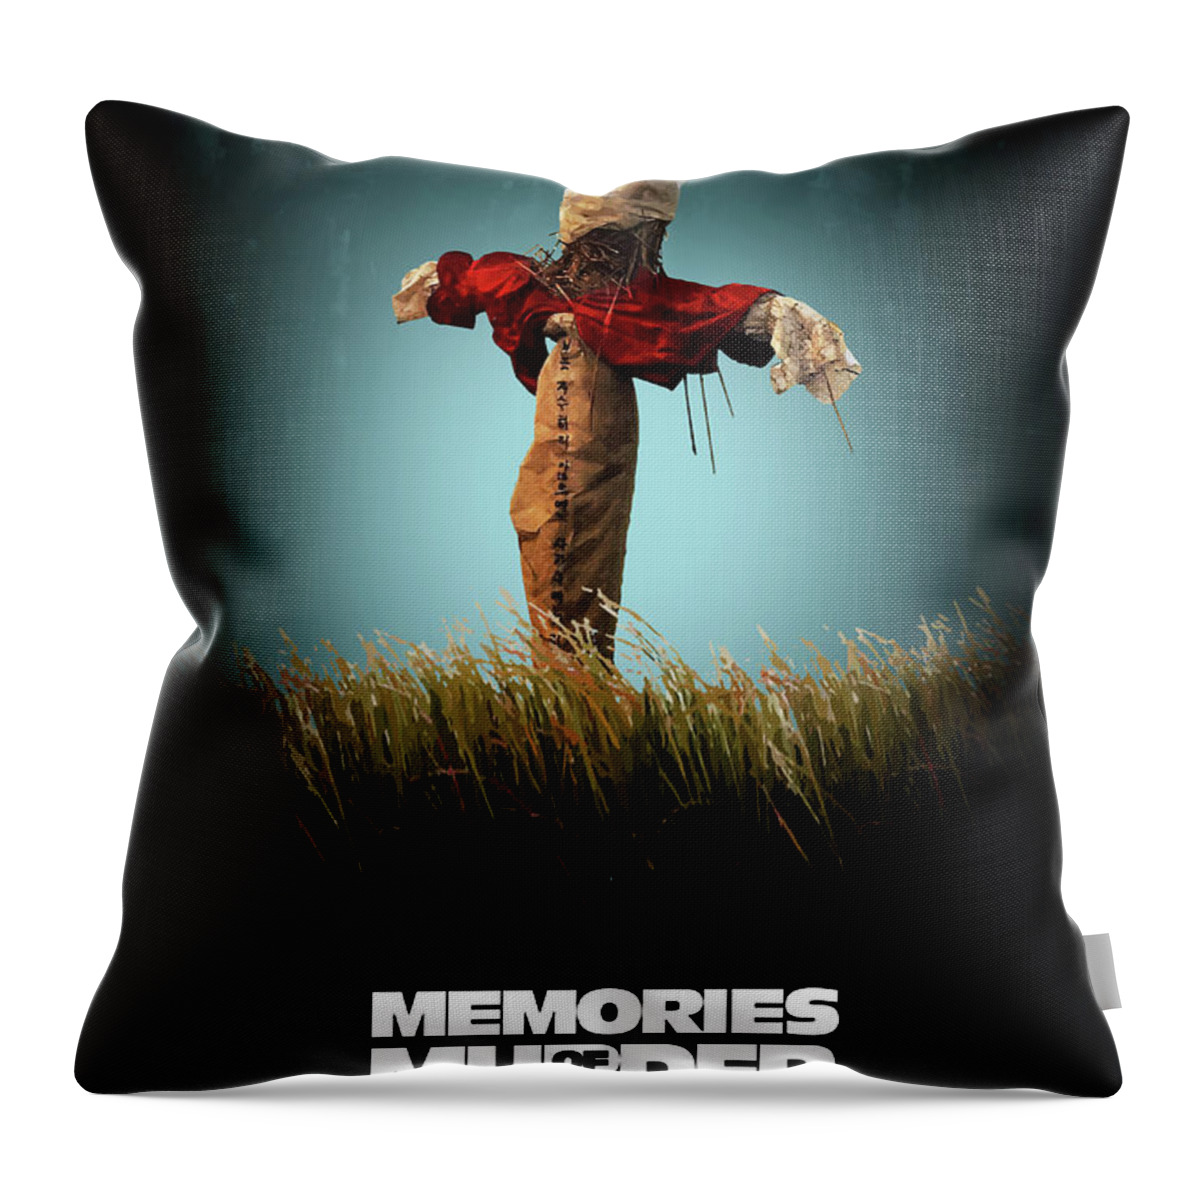 Movie Poster Throw Pillow featuring the digital art Memories Of Murder by Bo Kev